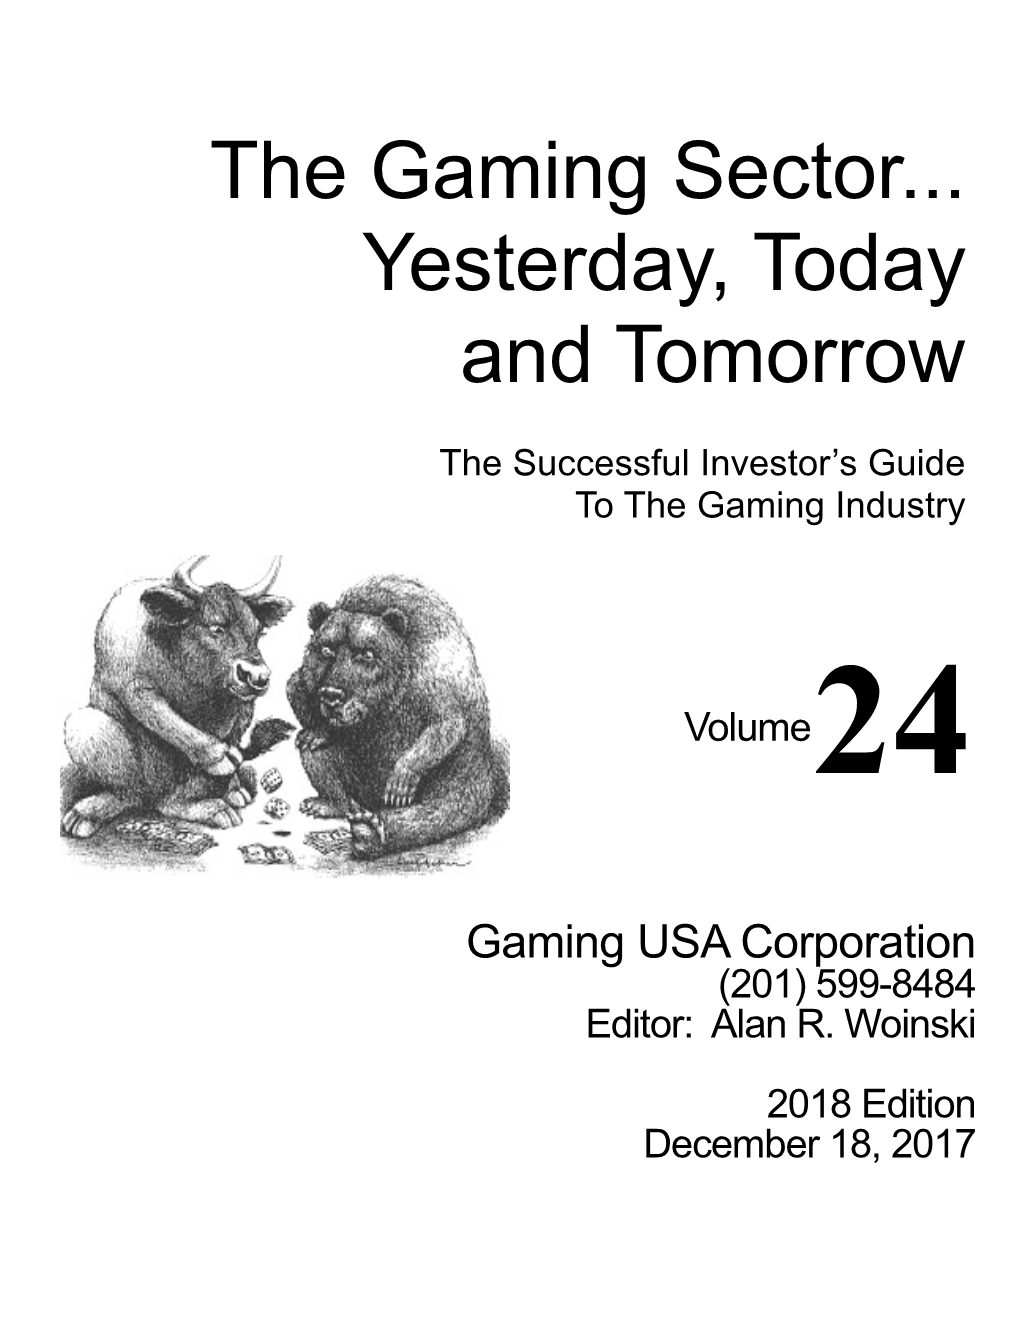 The Gaming Sector... Yesterday, Today and Tomorrow